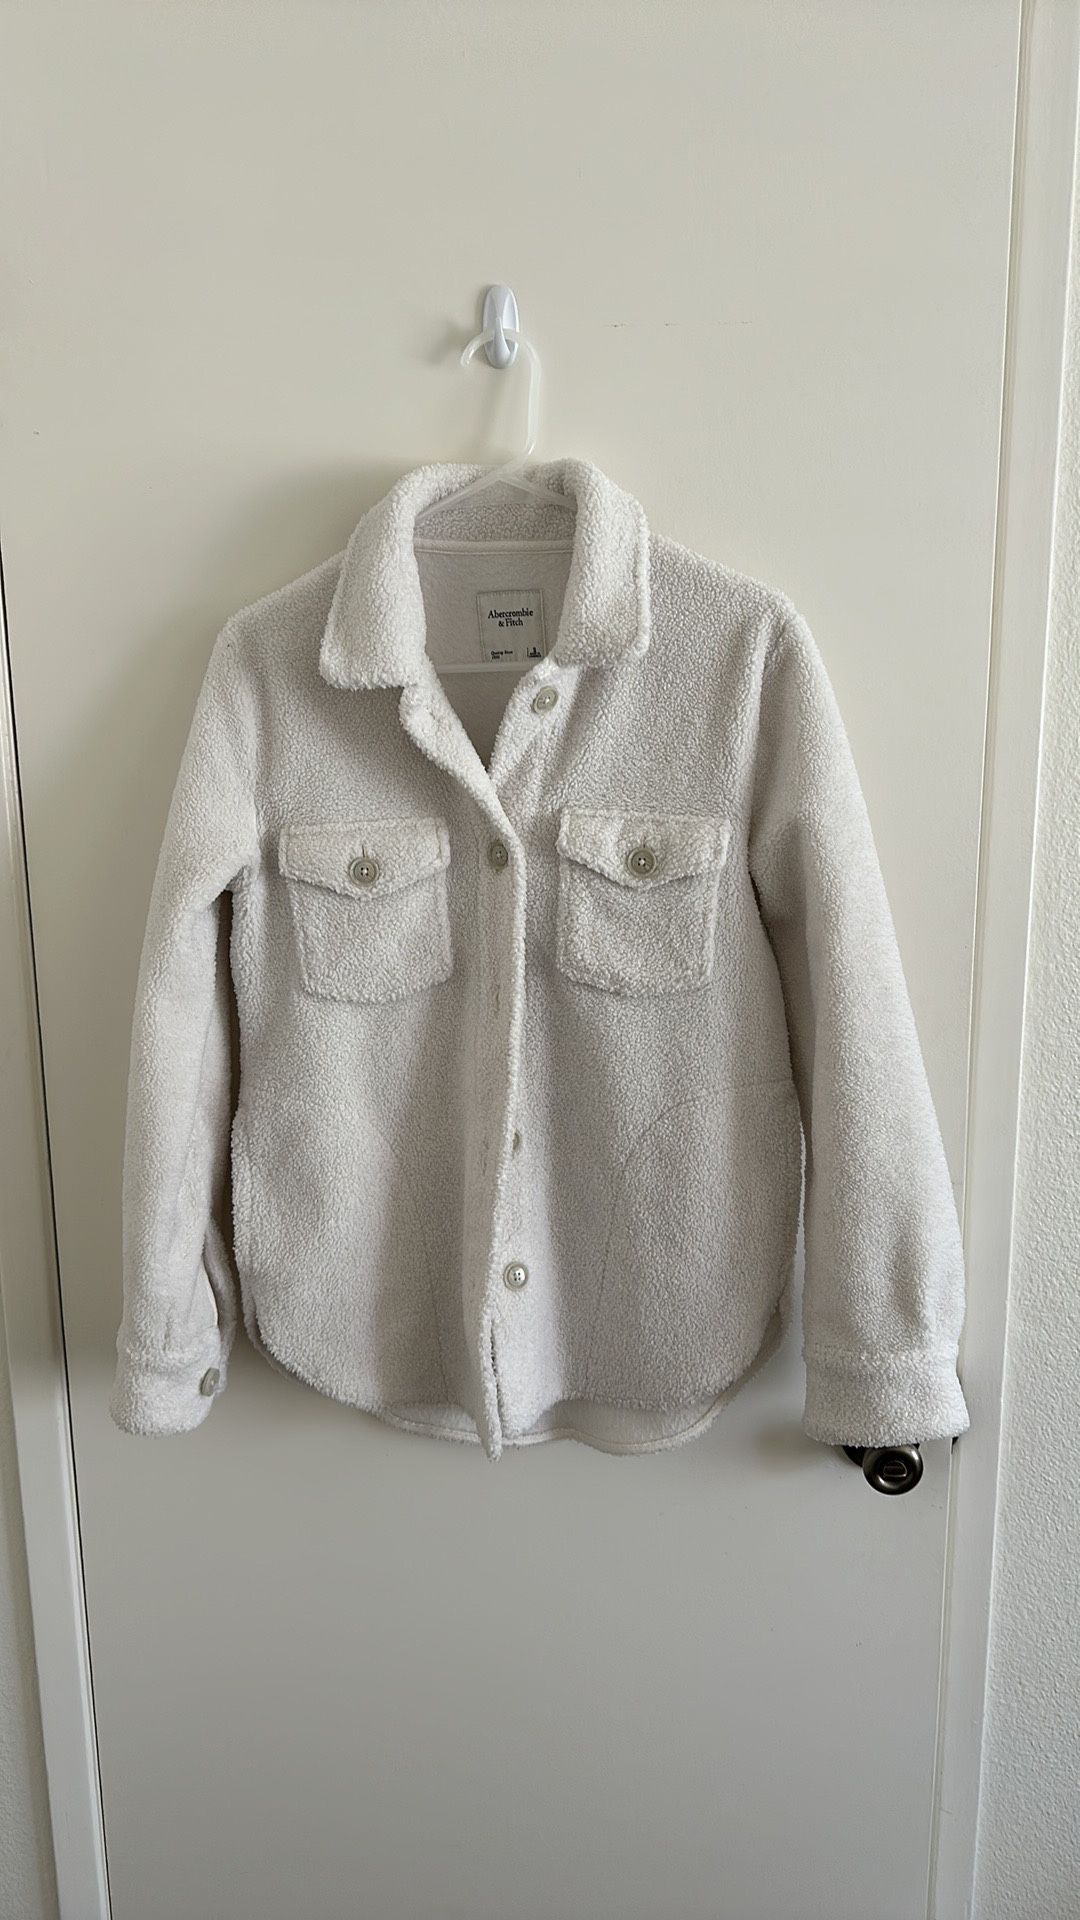 Abercrombie & Fitch Sherpa shacket